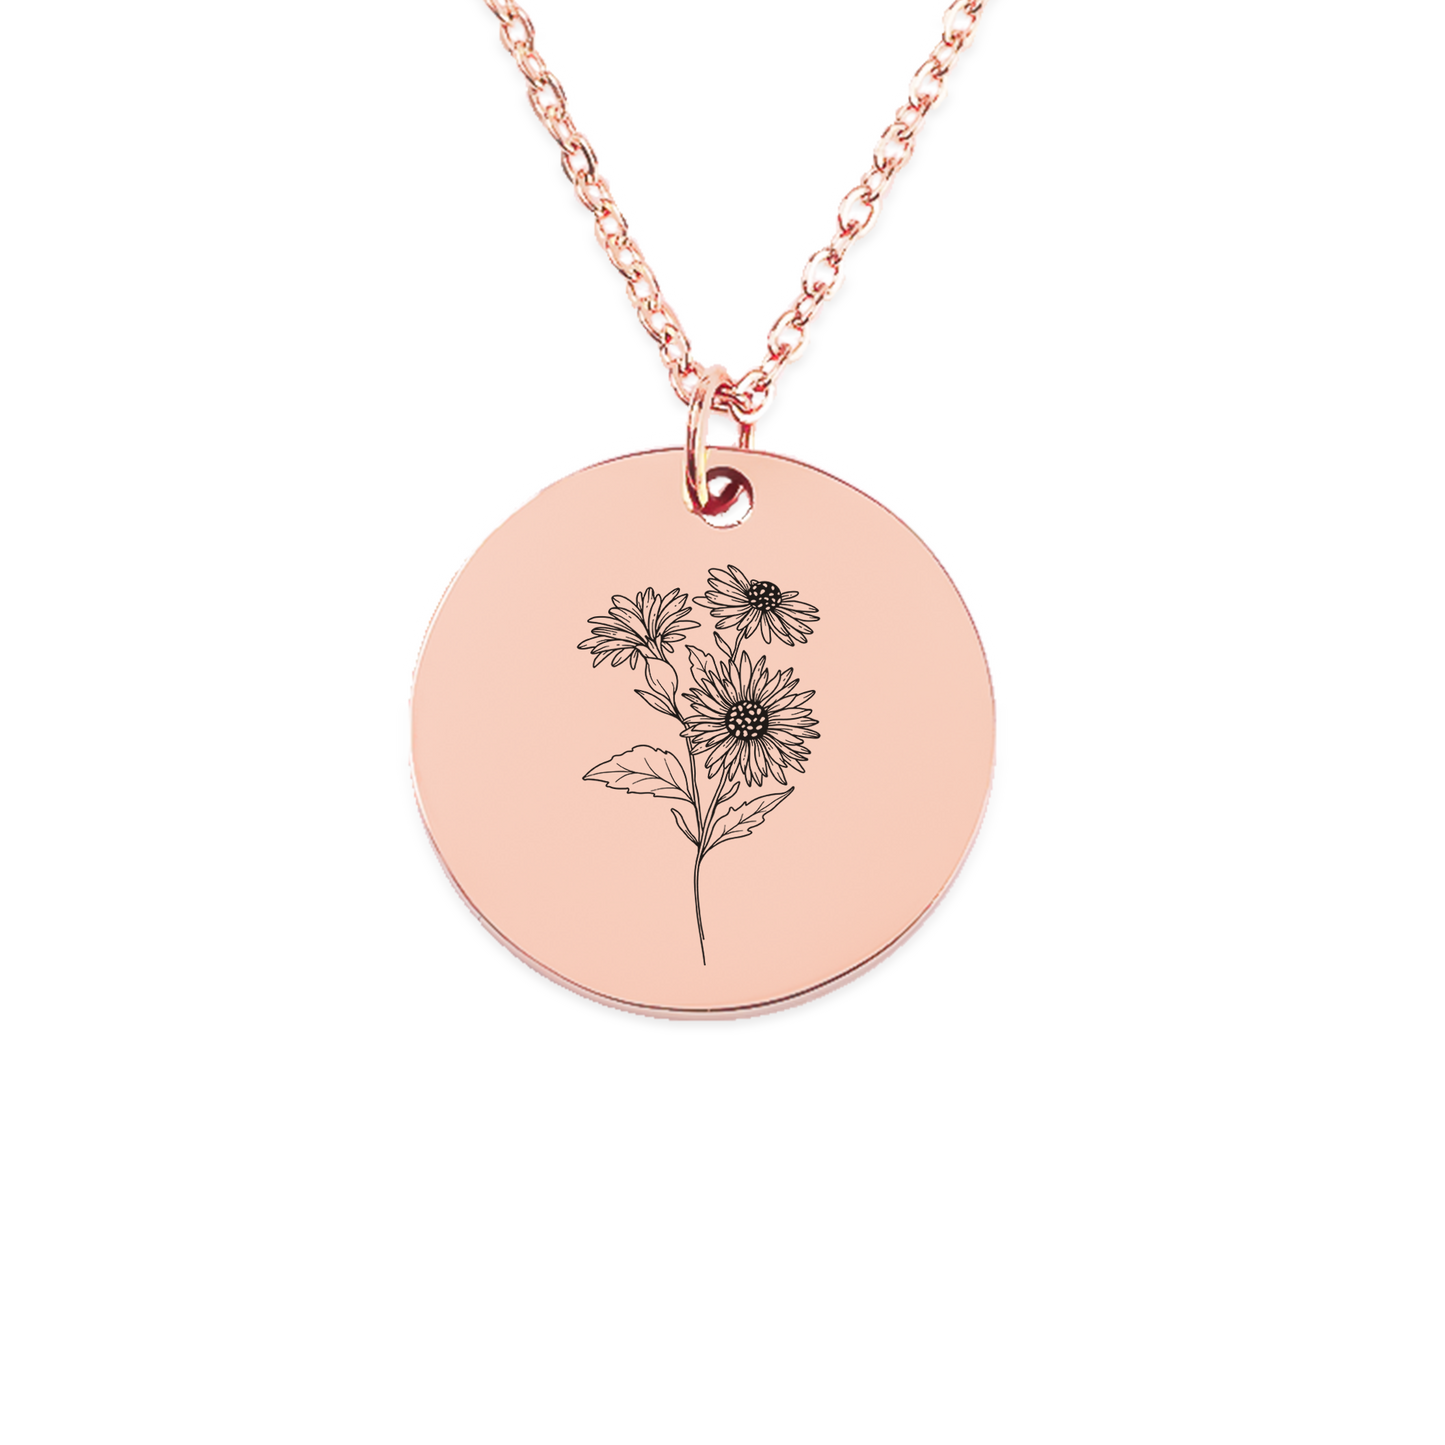 September Birth Flower Coin Necklace (Aster)